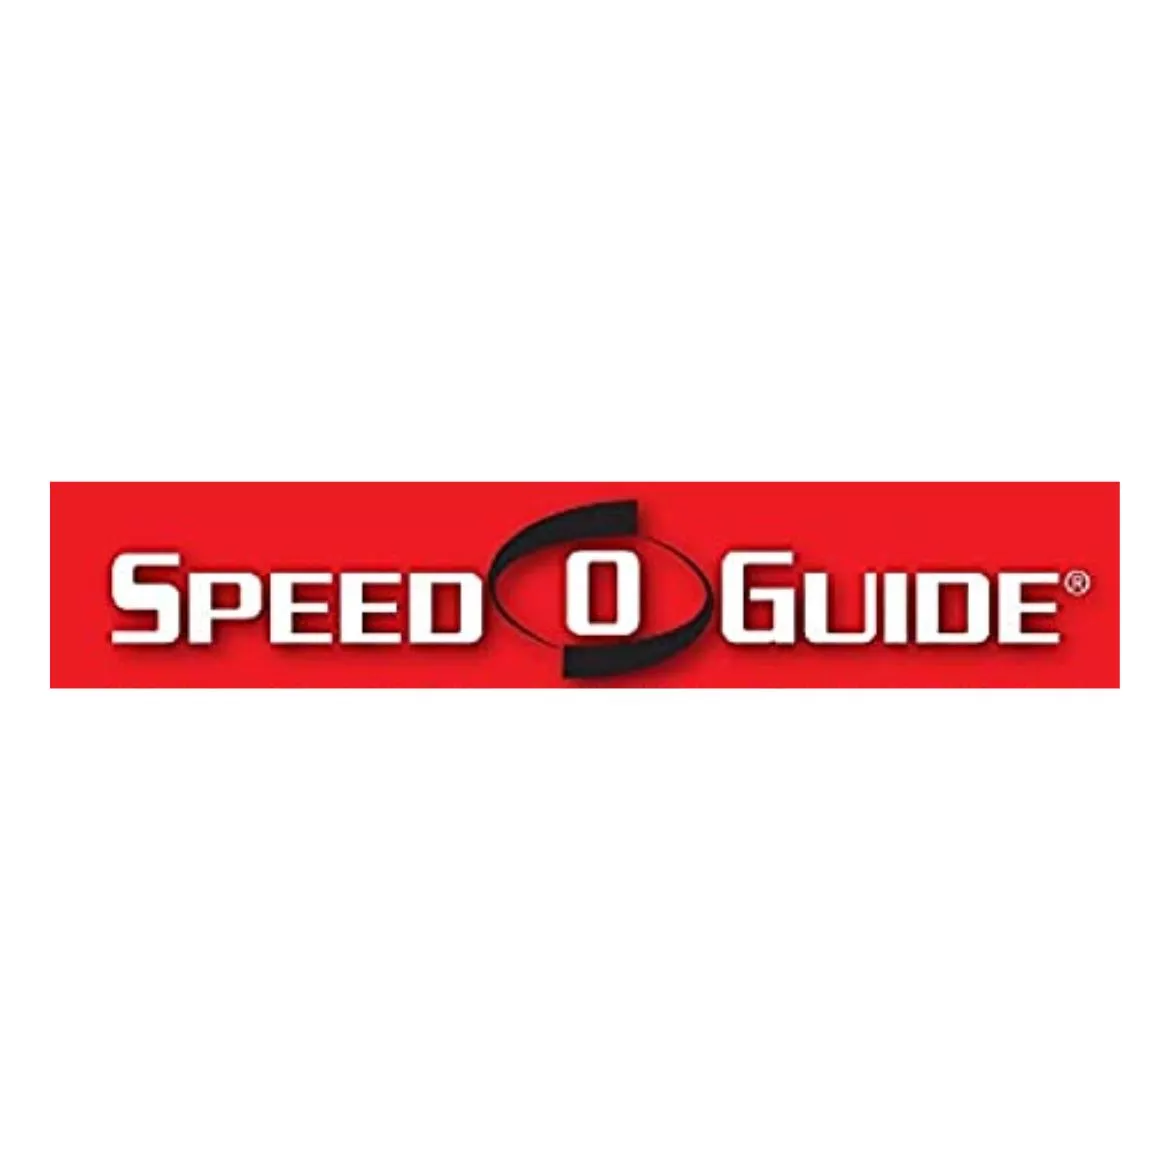 Speed O Guide